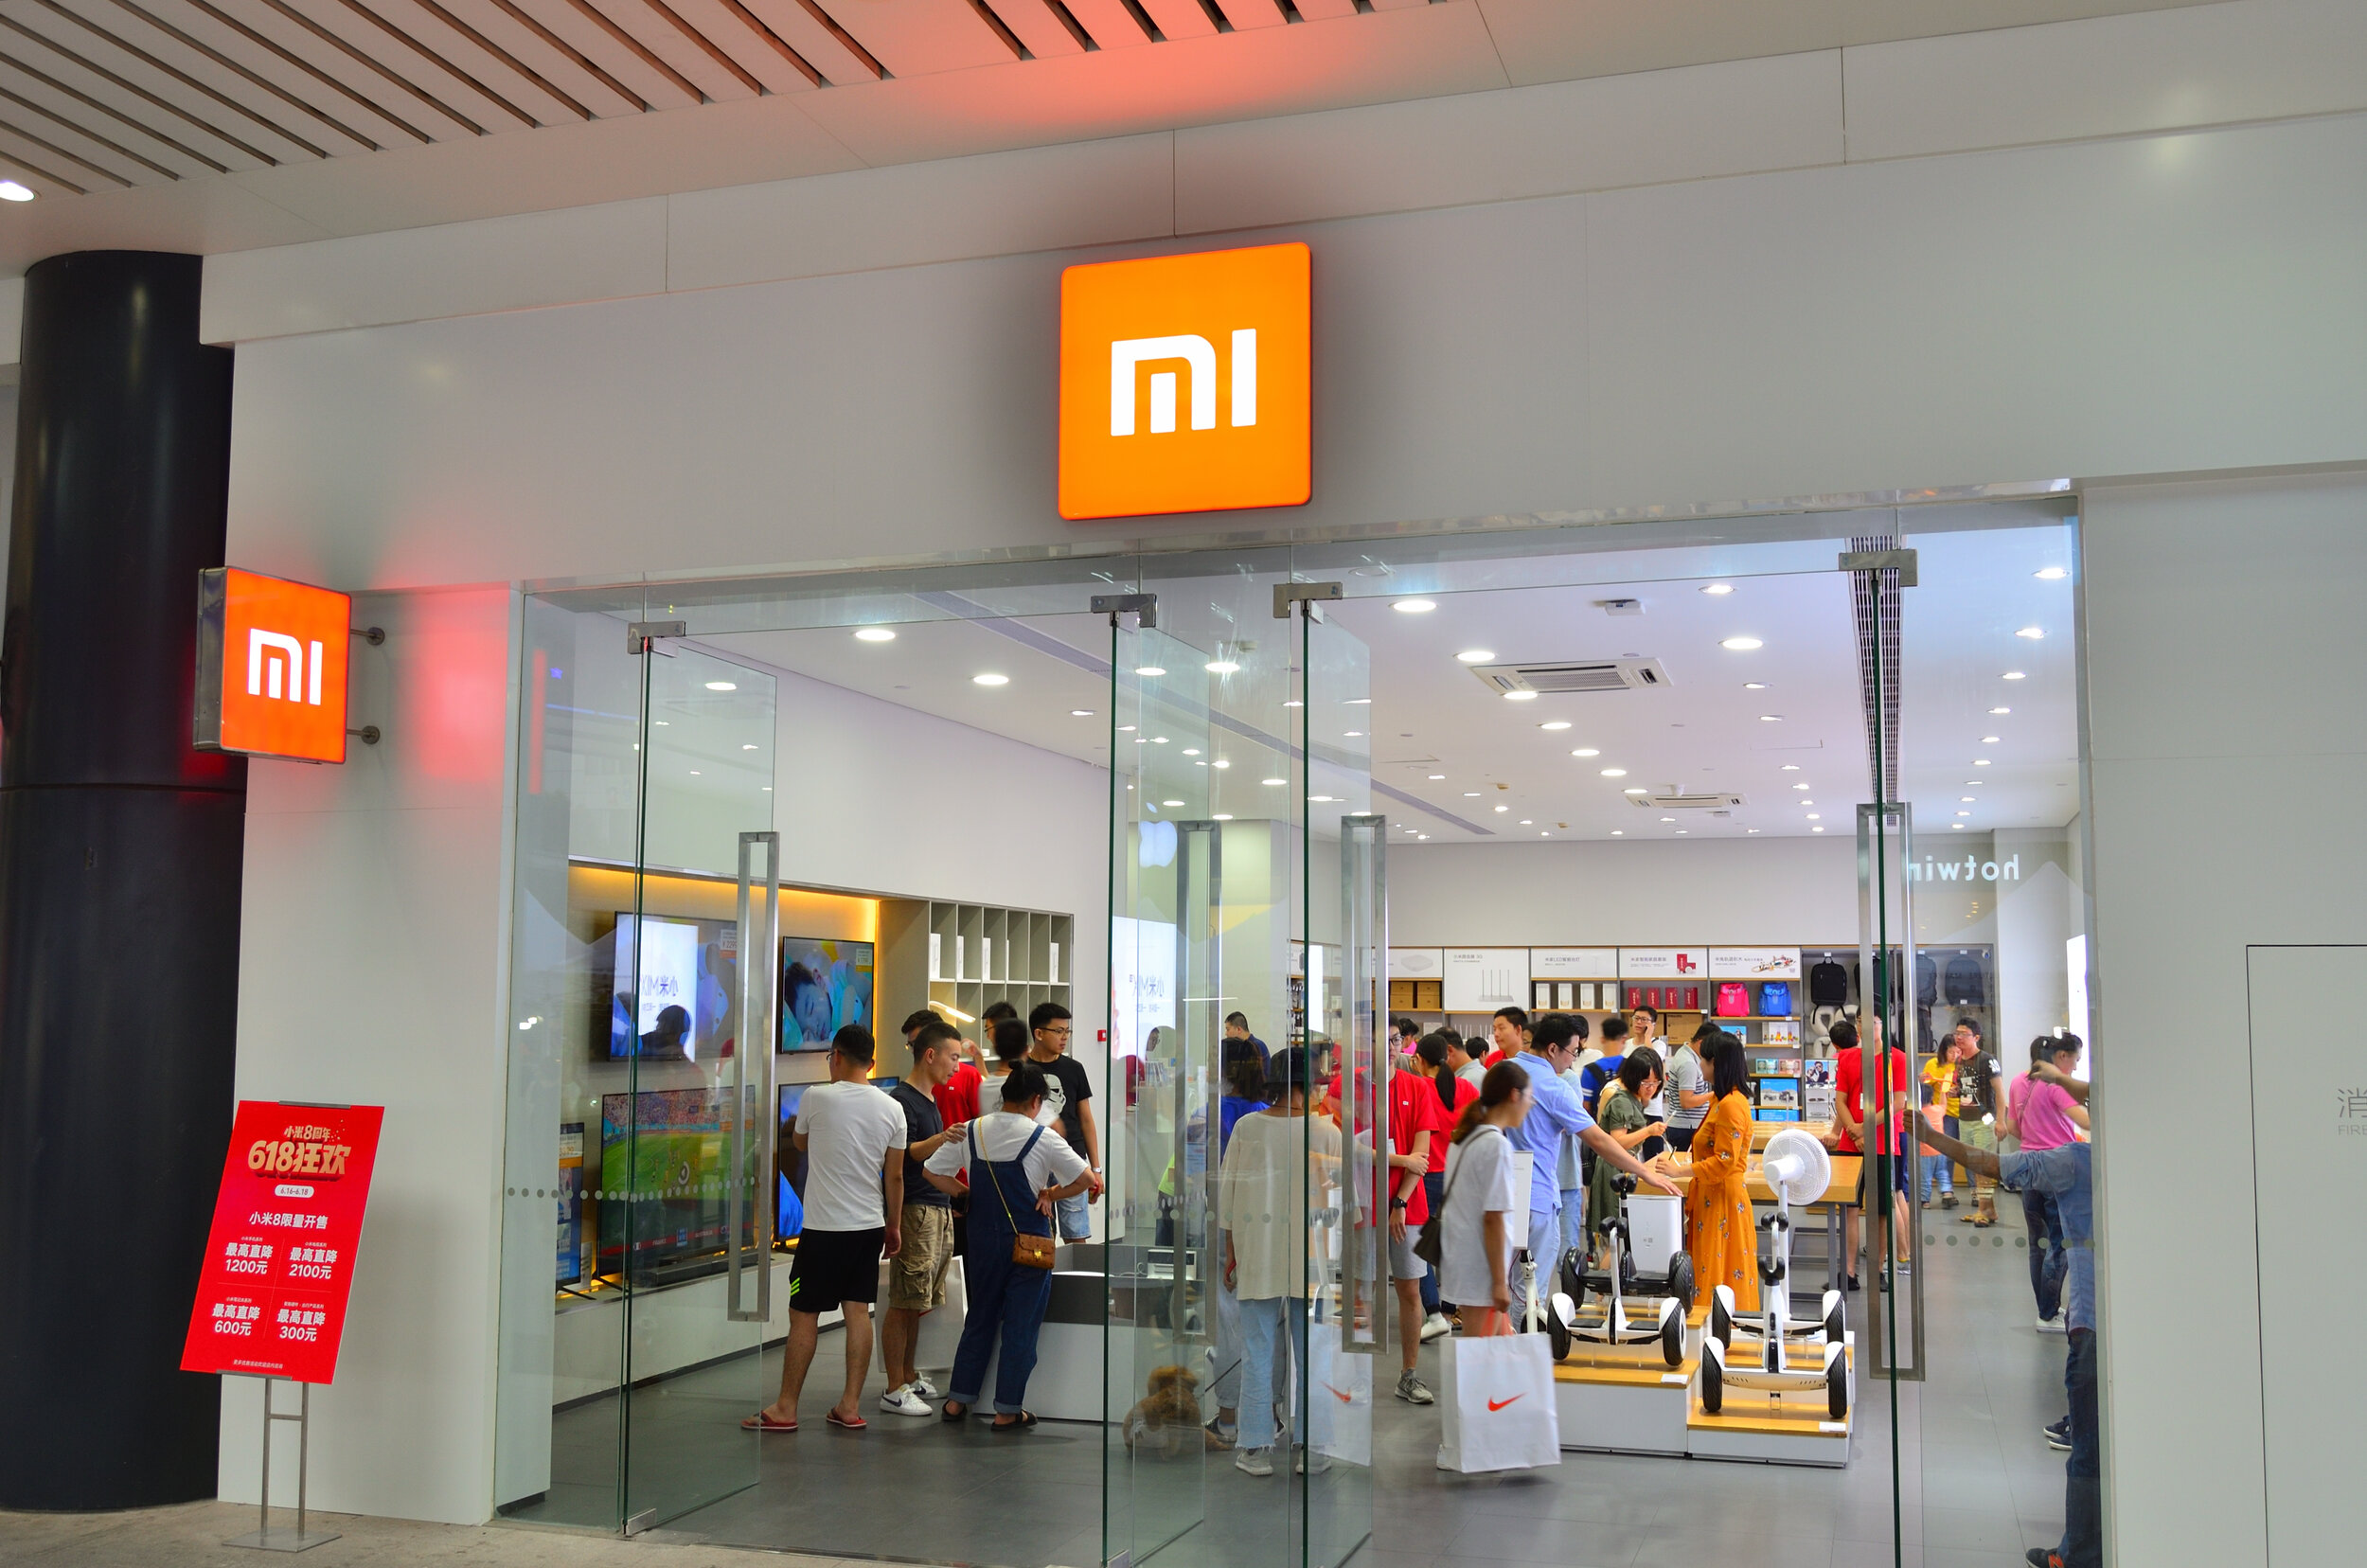 Xiaomi started blocking gray smartphones in some countries